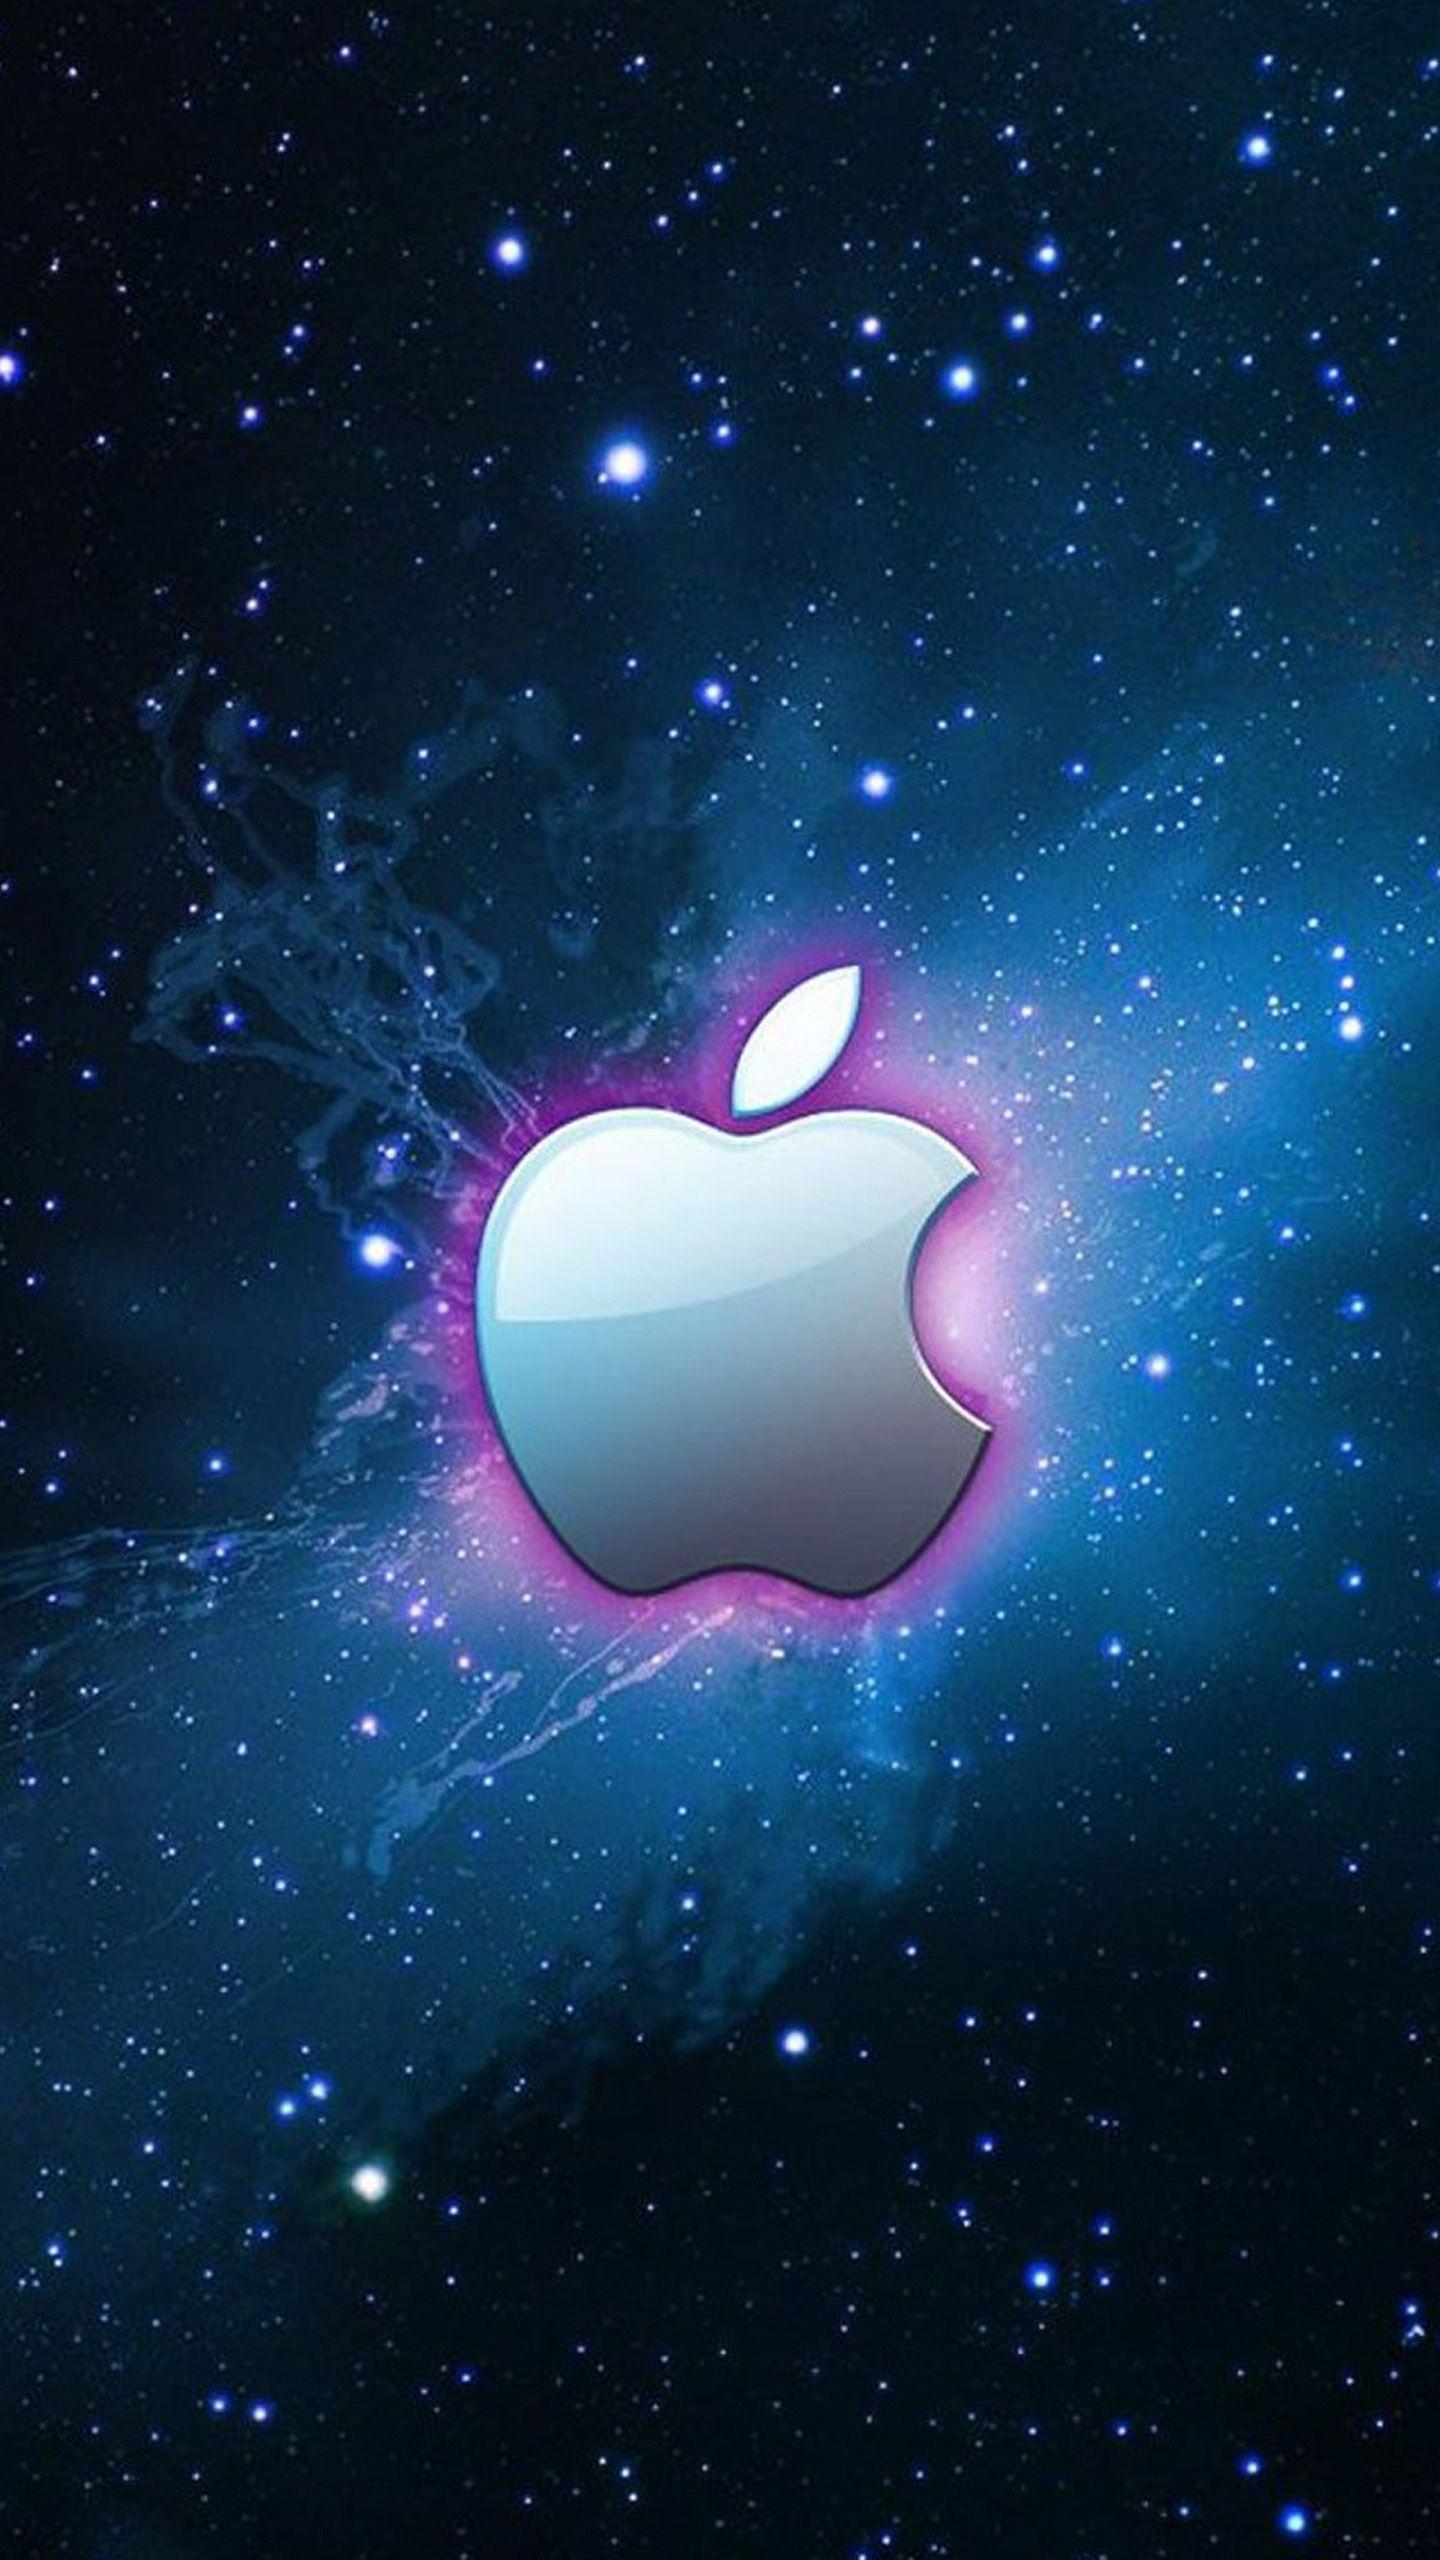 Galxay Apple Logo - Awesome Apple logo 1 Galaxy S6 Wallpaper | Galaxy S6 Wallpapers